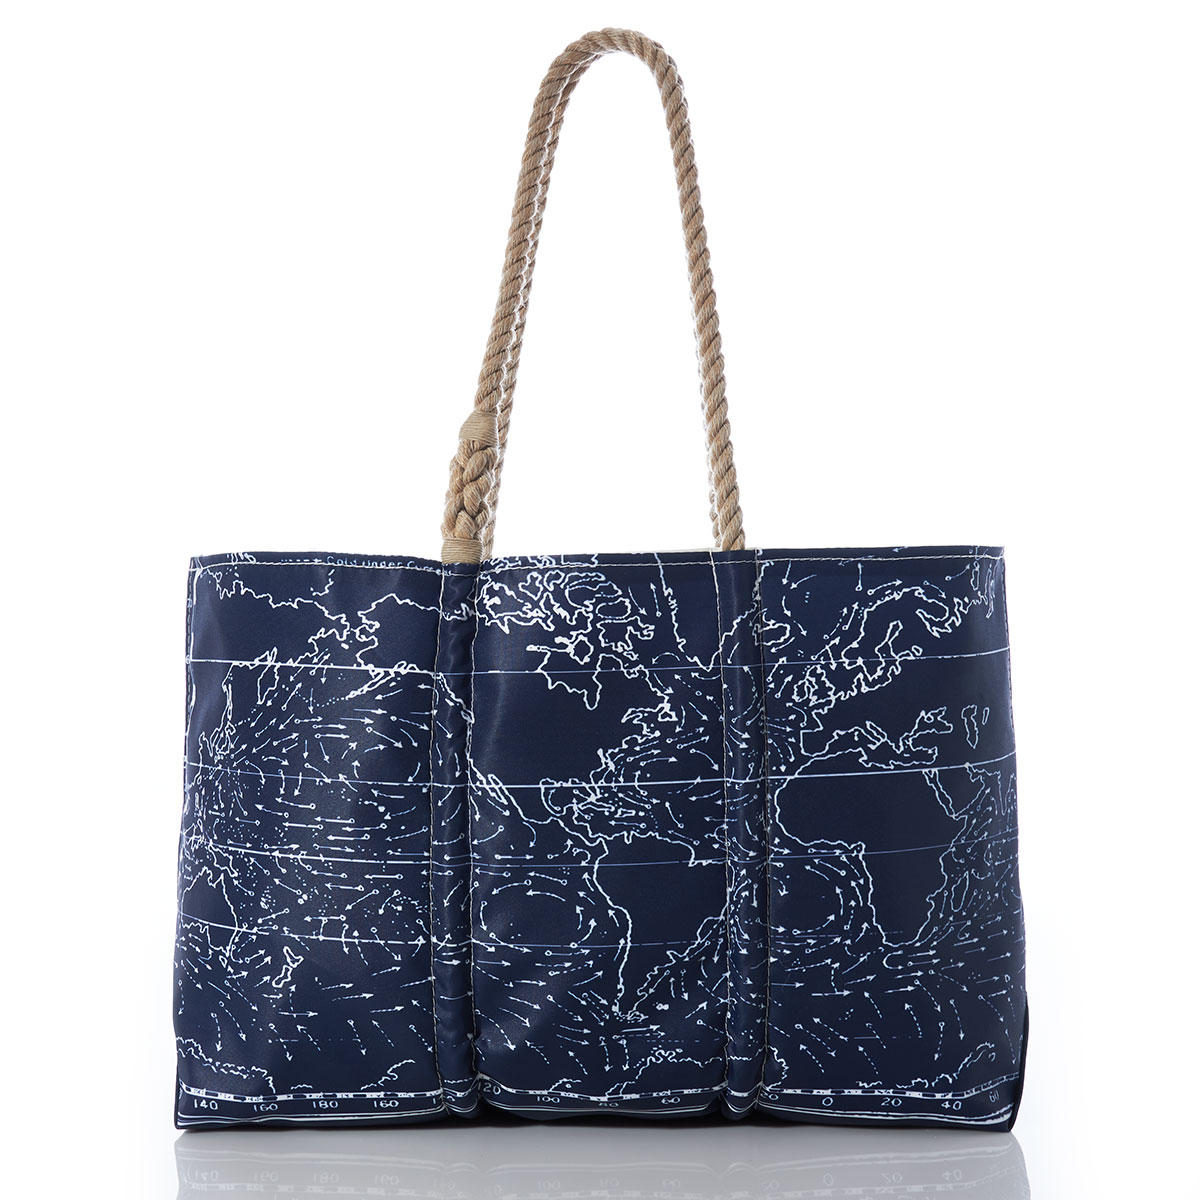 white arrows showing currents swirl around white outlined continents on a navy recycled sail cloth tote with hemp rope handles